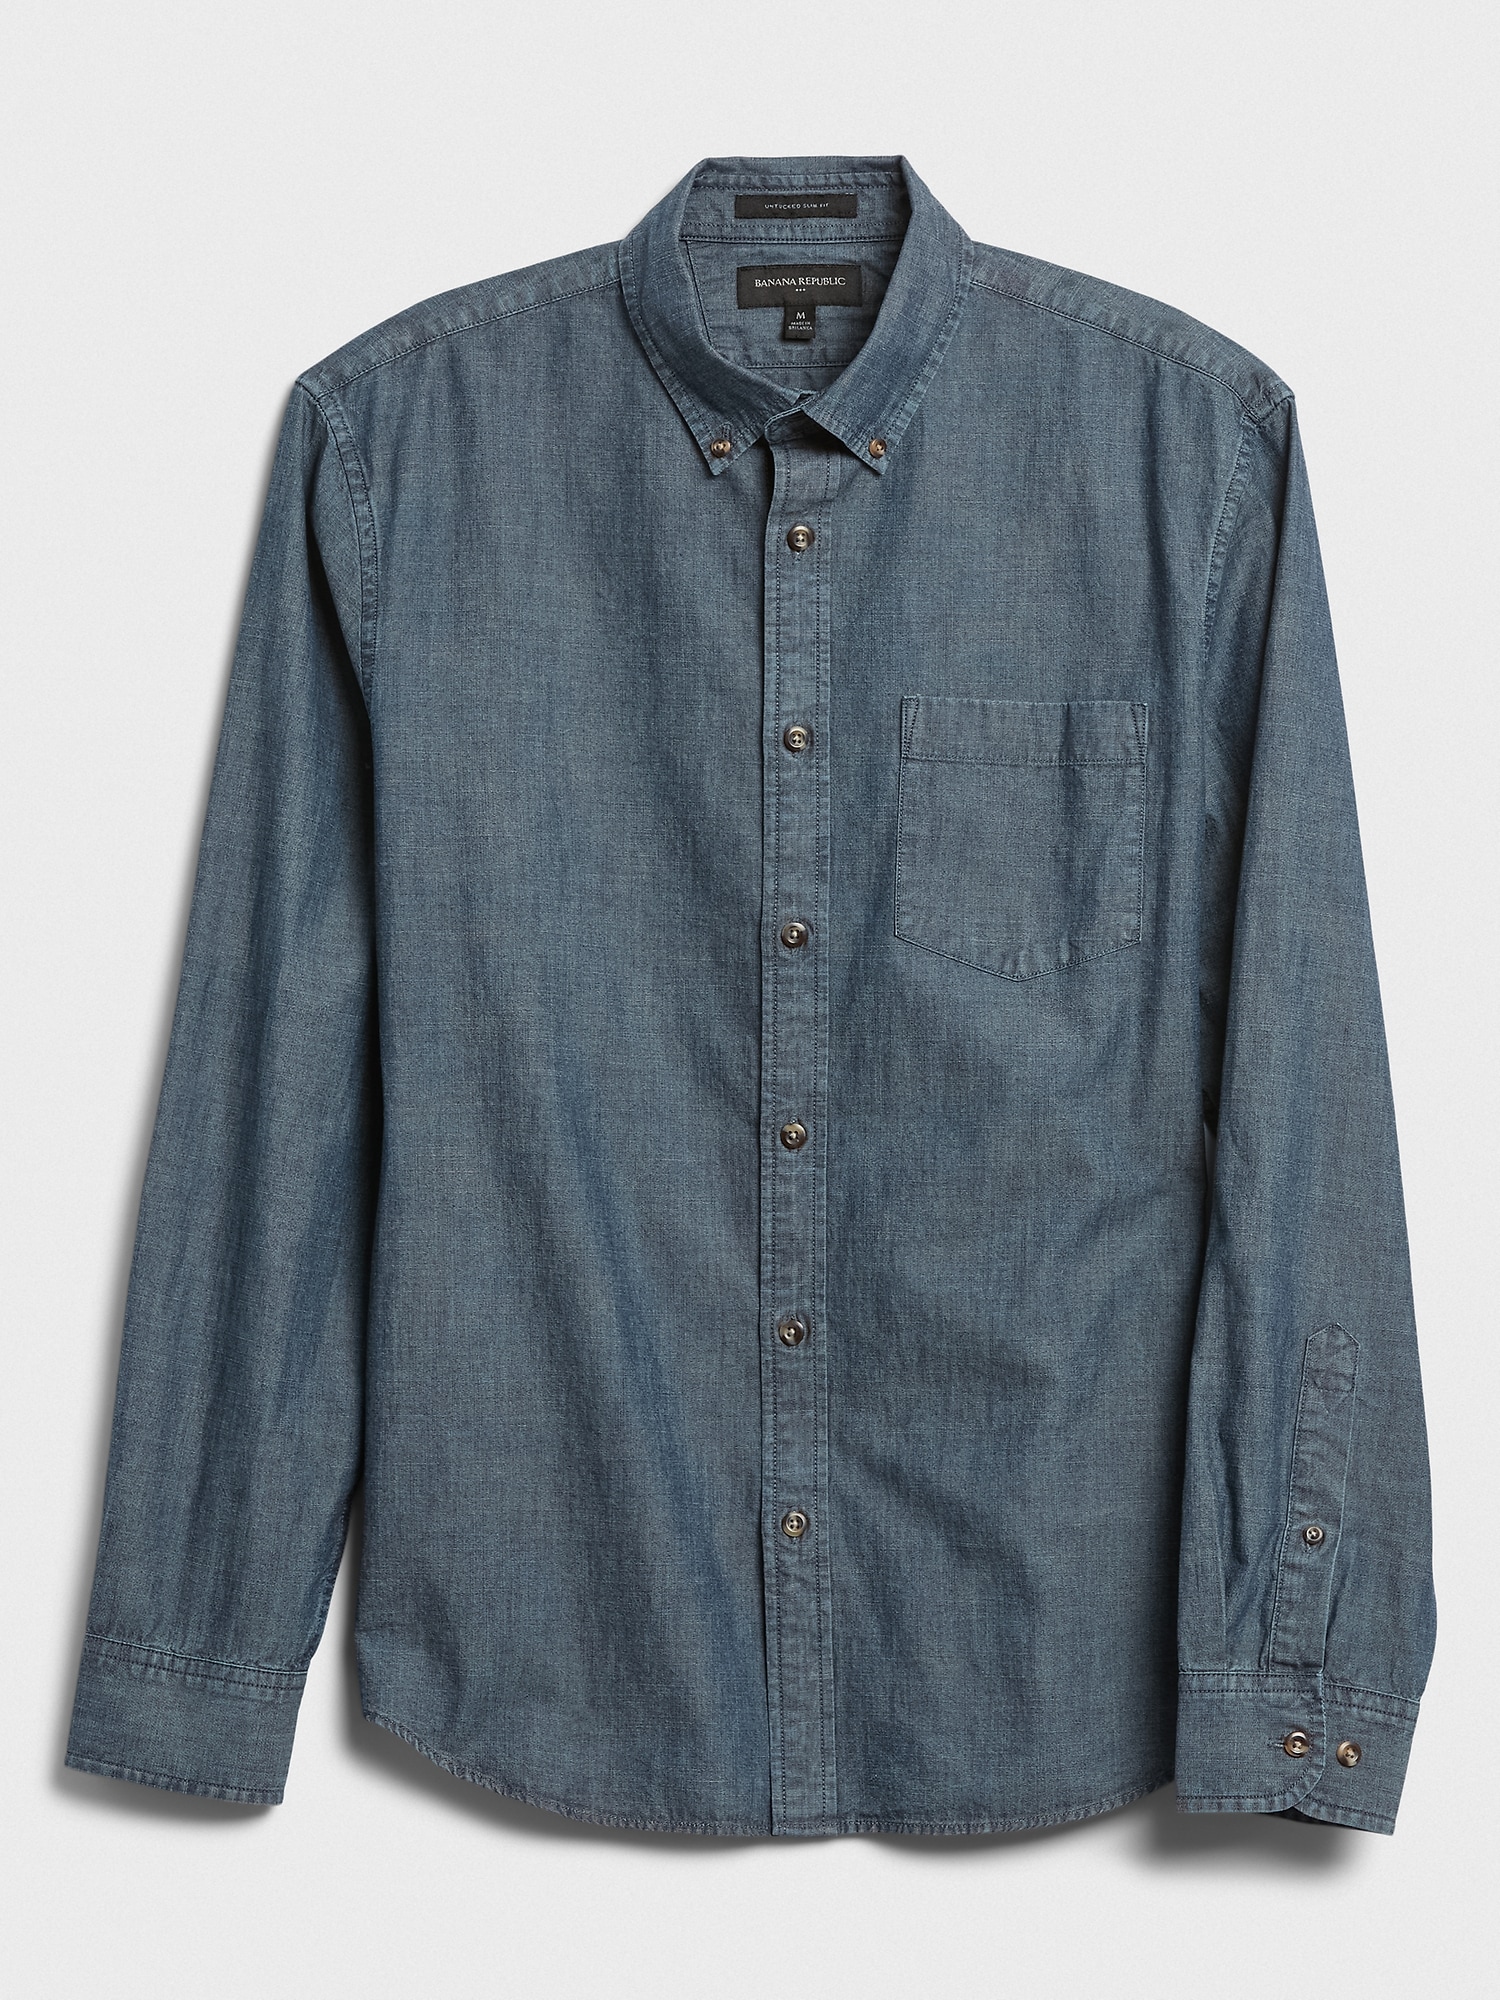 Made with Organically Grown Cotton Chambray Shirt